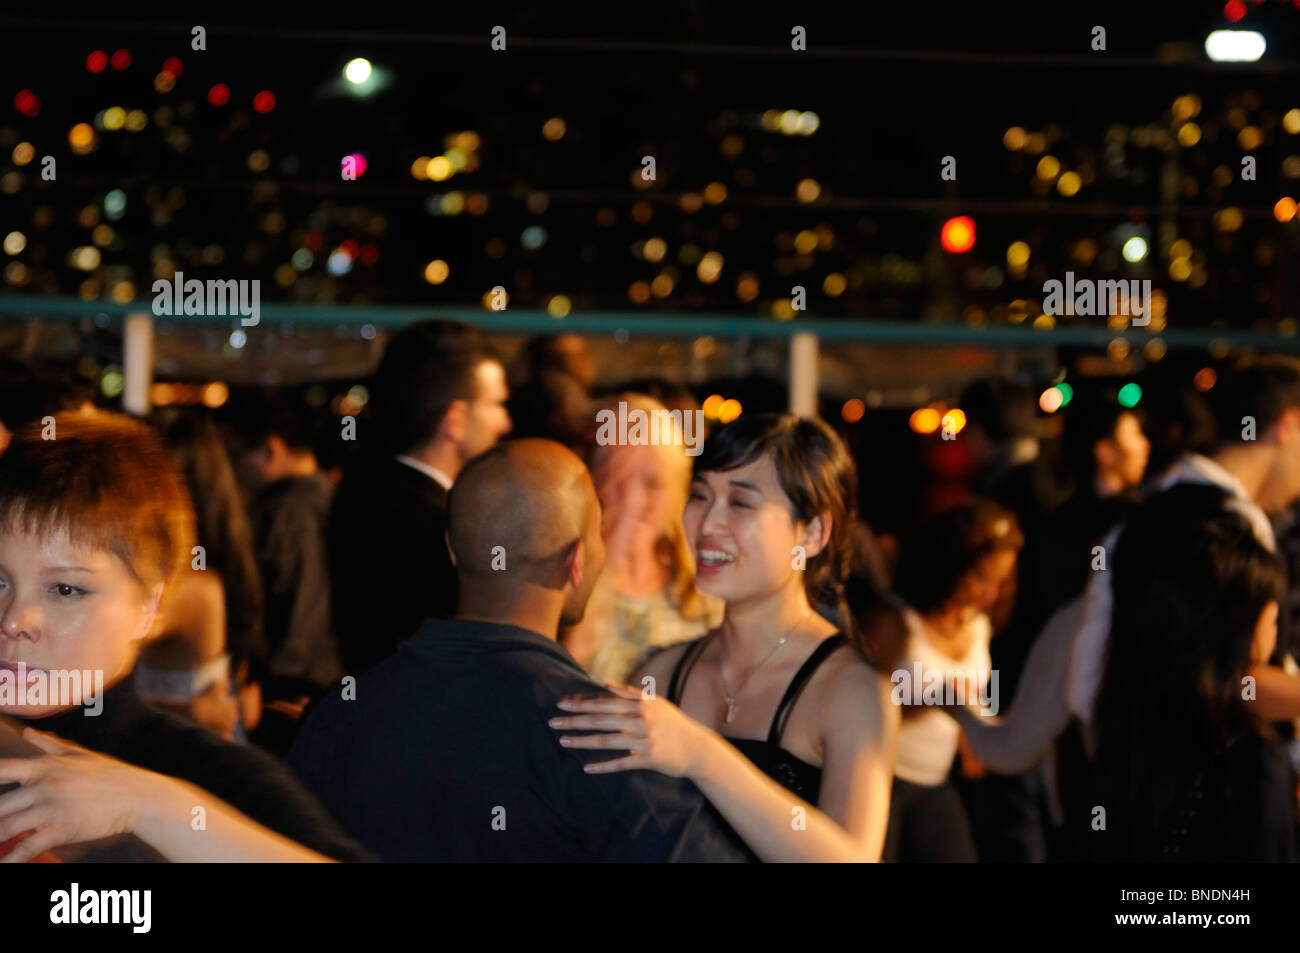 Young people on a Latin dance club boat cruise with Toronto skyline lights at night Stock Photo